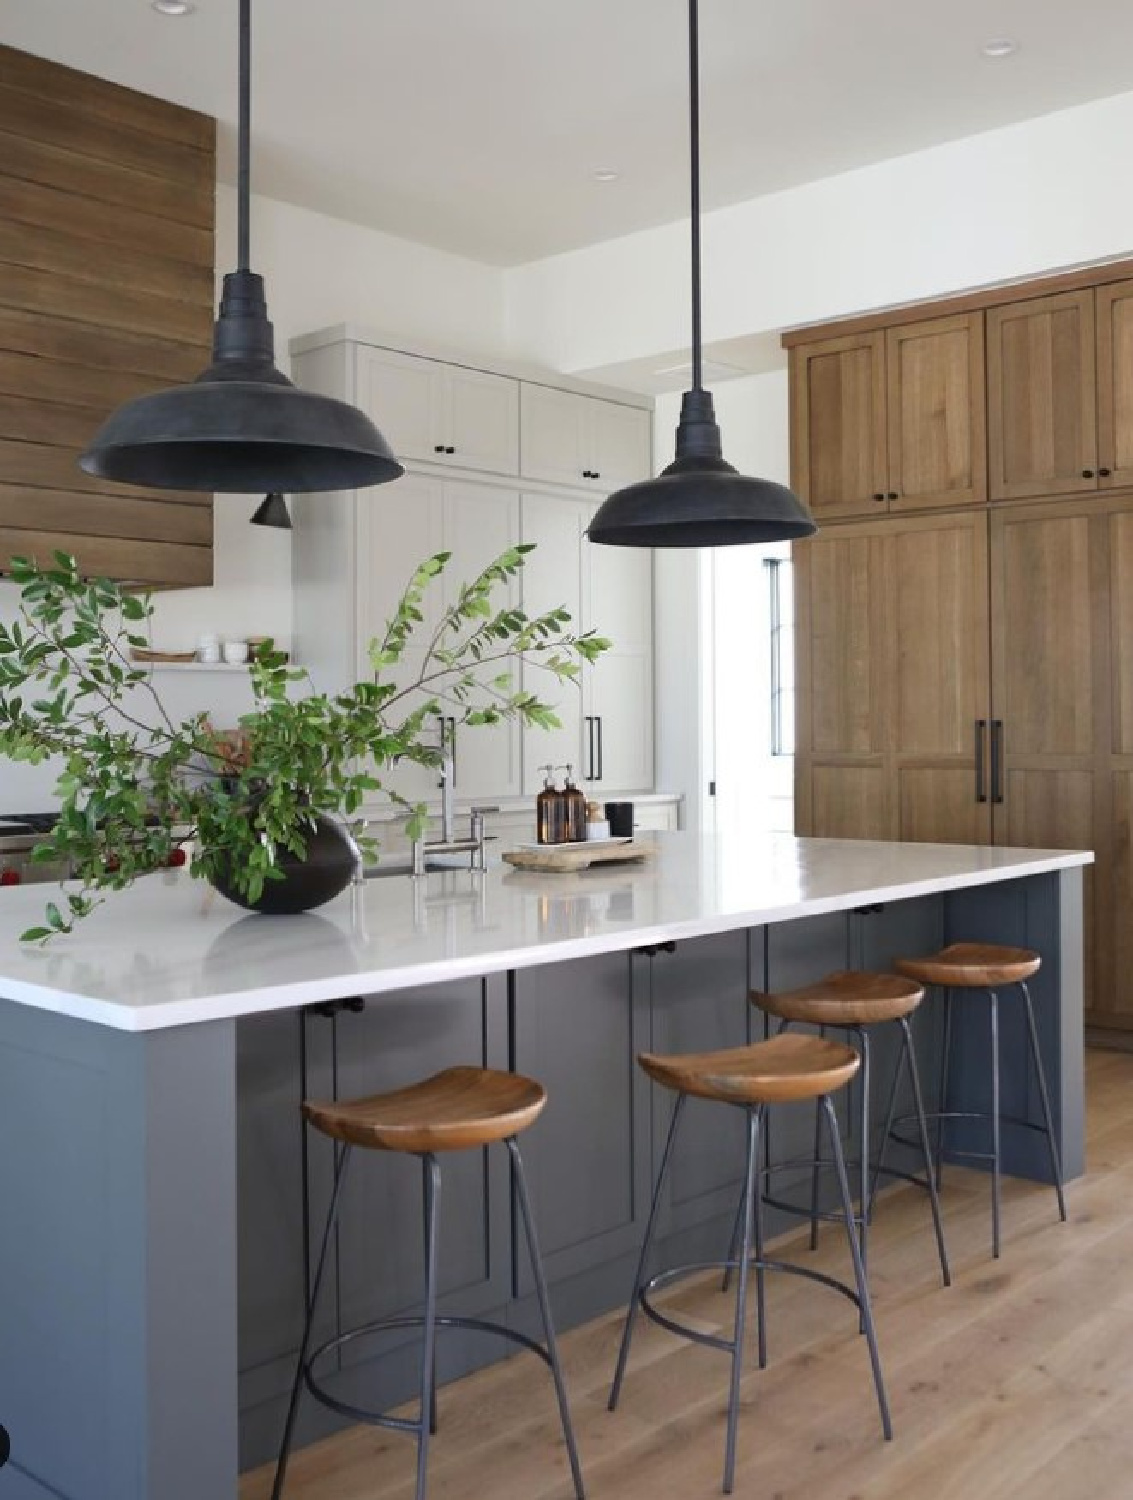 Beautiful multi-toned kitchen by @browneyedfox with SW Agreeable Gray on cabinet, Night Owl on island. #agreeablegray #nightowl #sherwinwilliamsgraypaintcolors